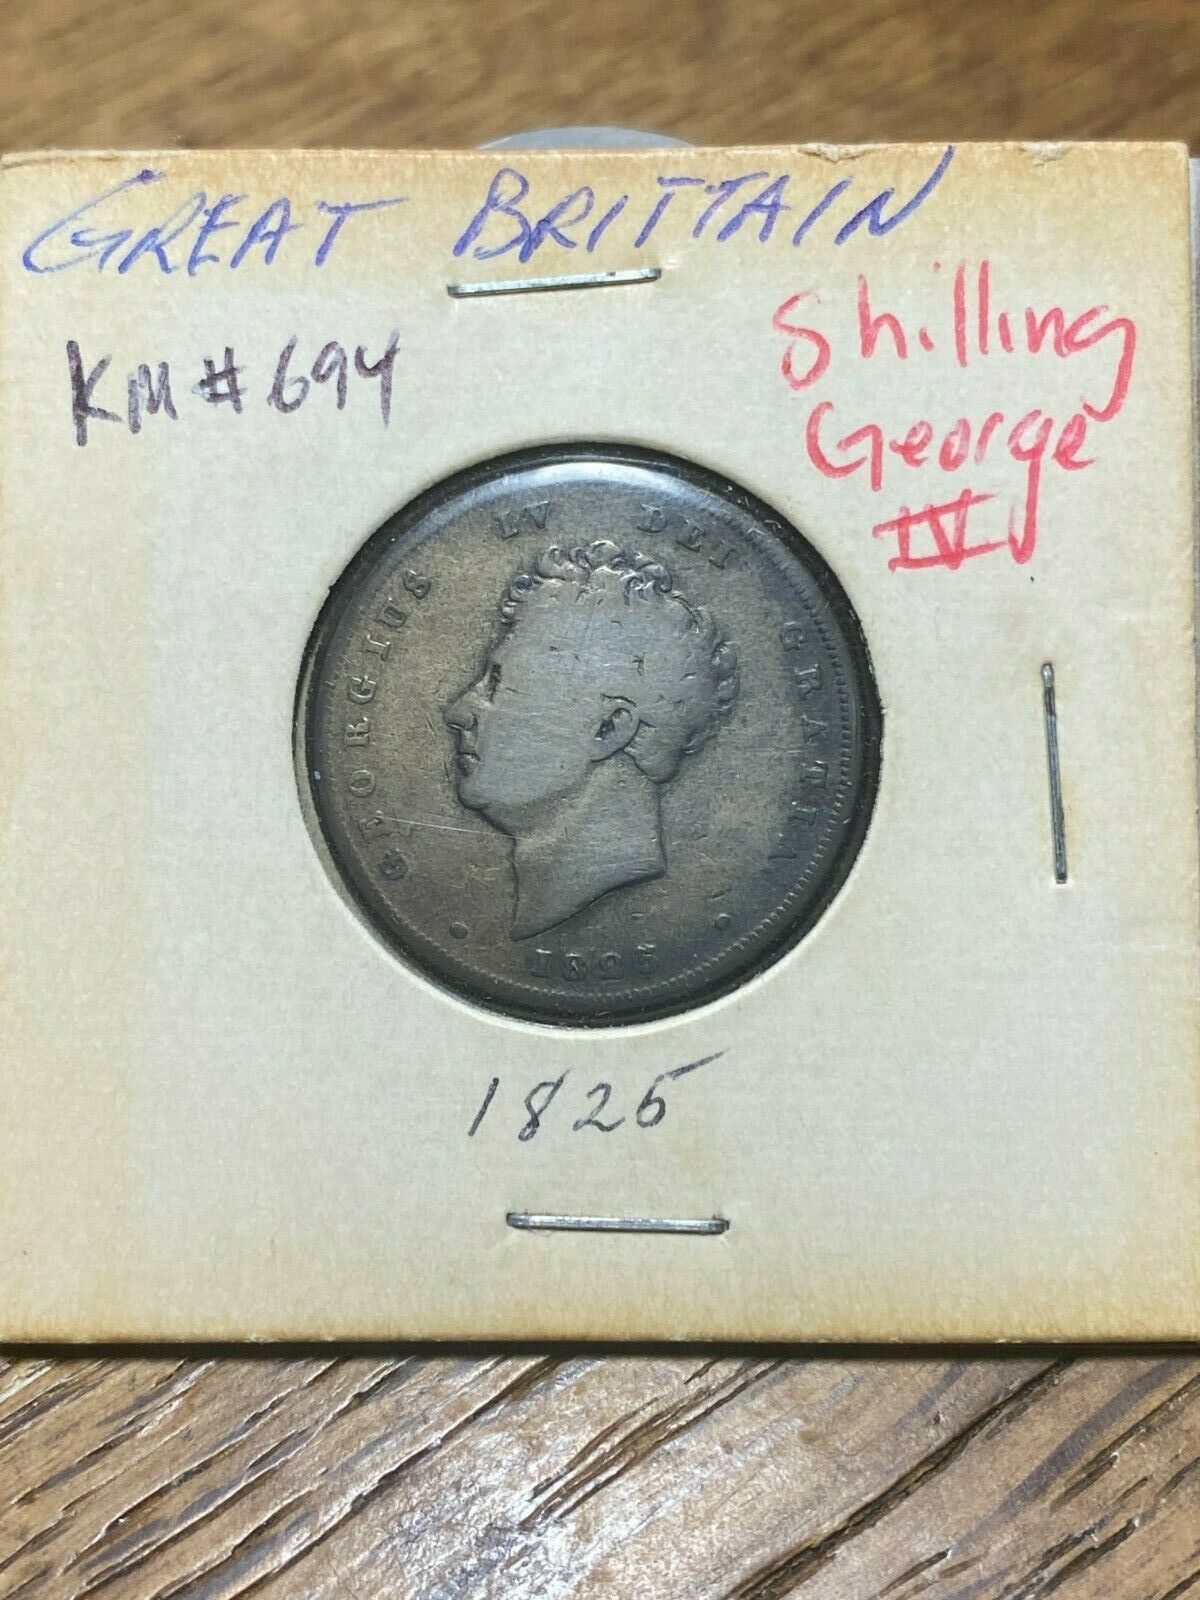 1825 Great Britain Shilling George Iv Good Condition Almost 200 Years Old